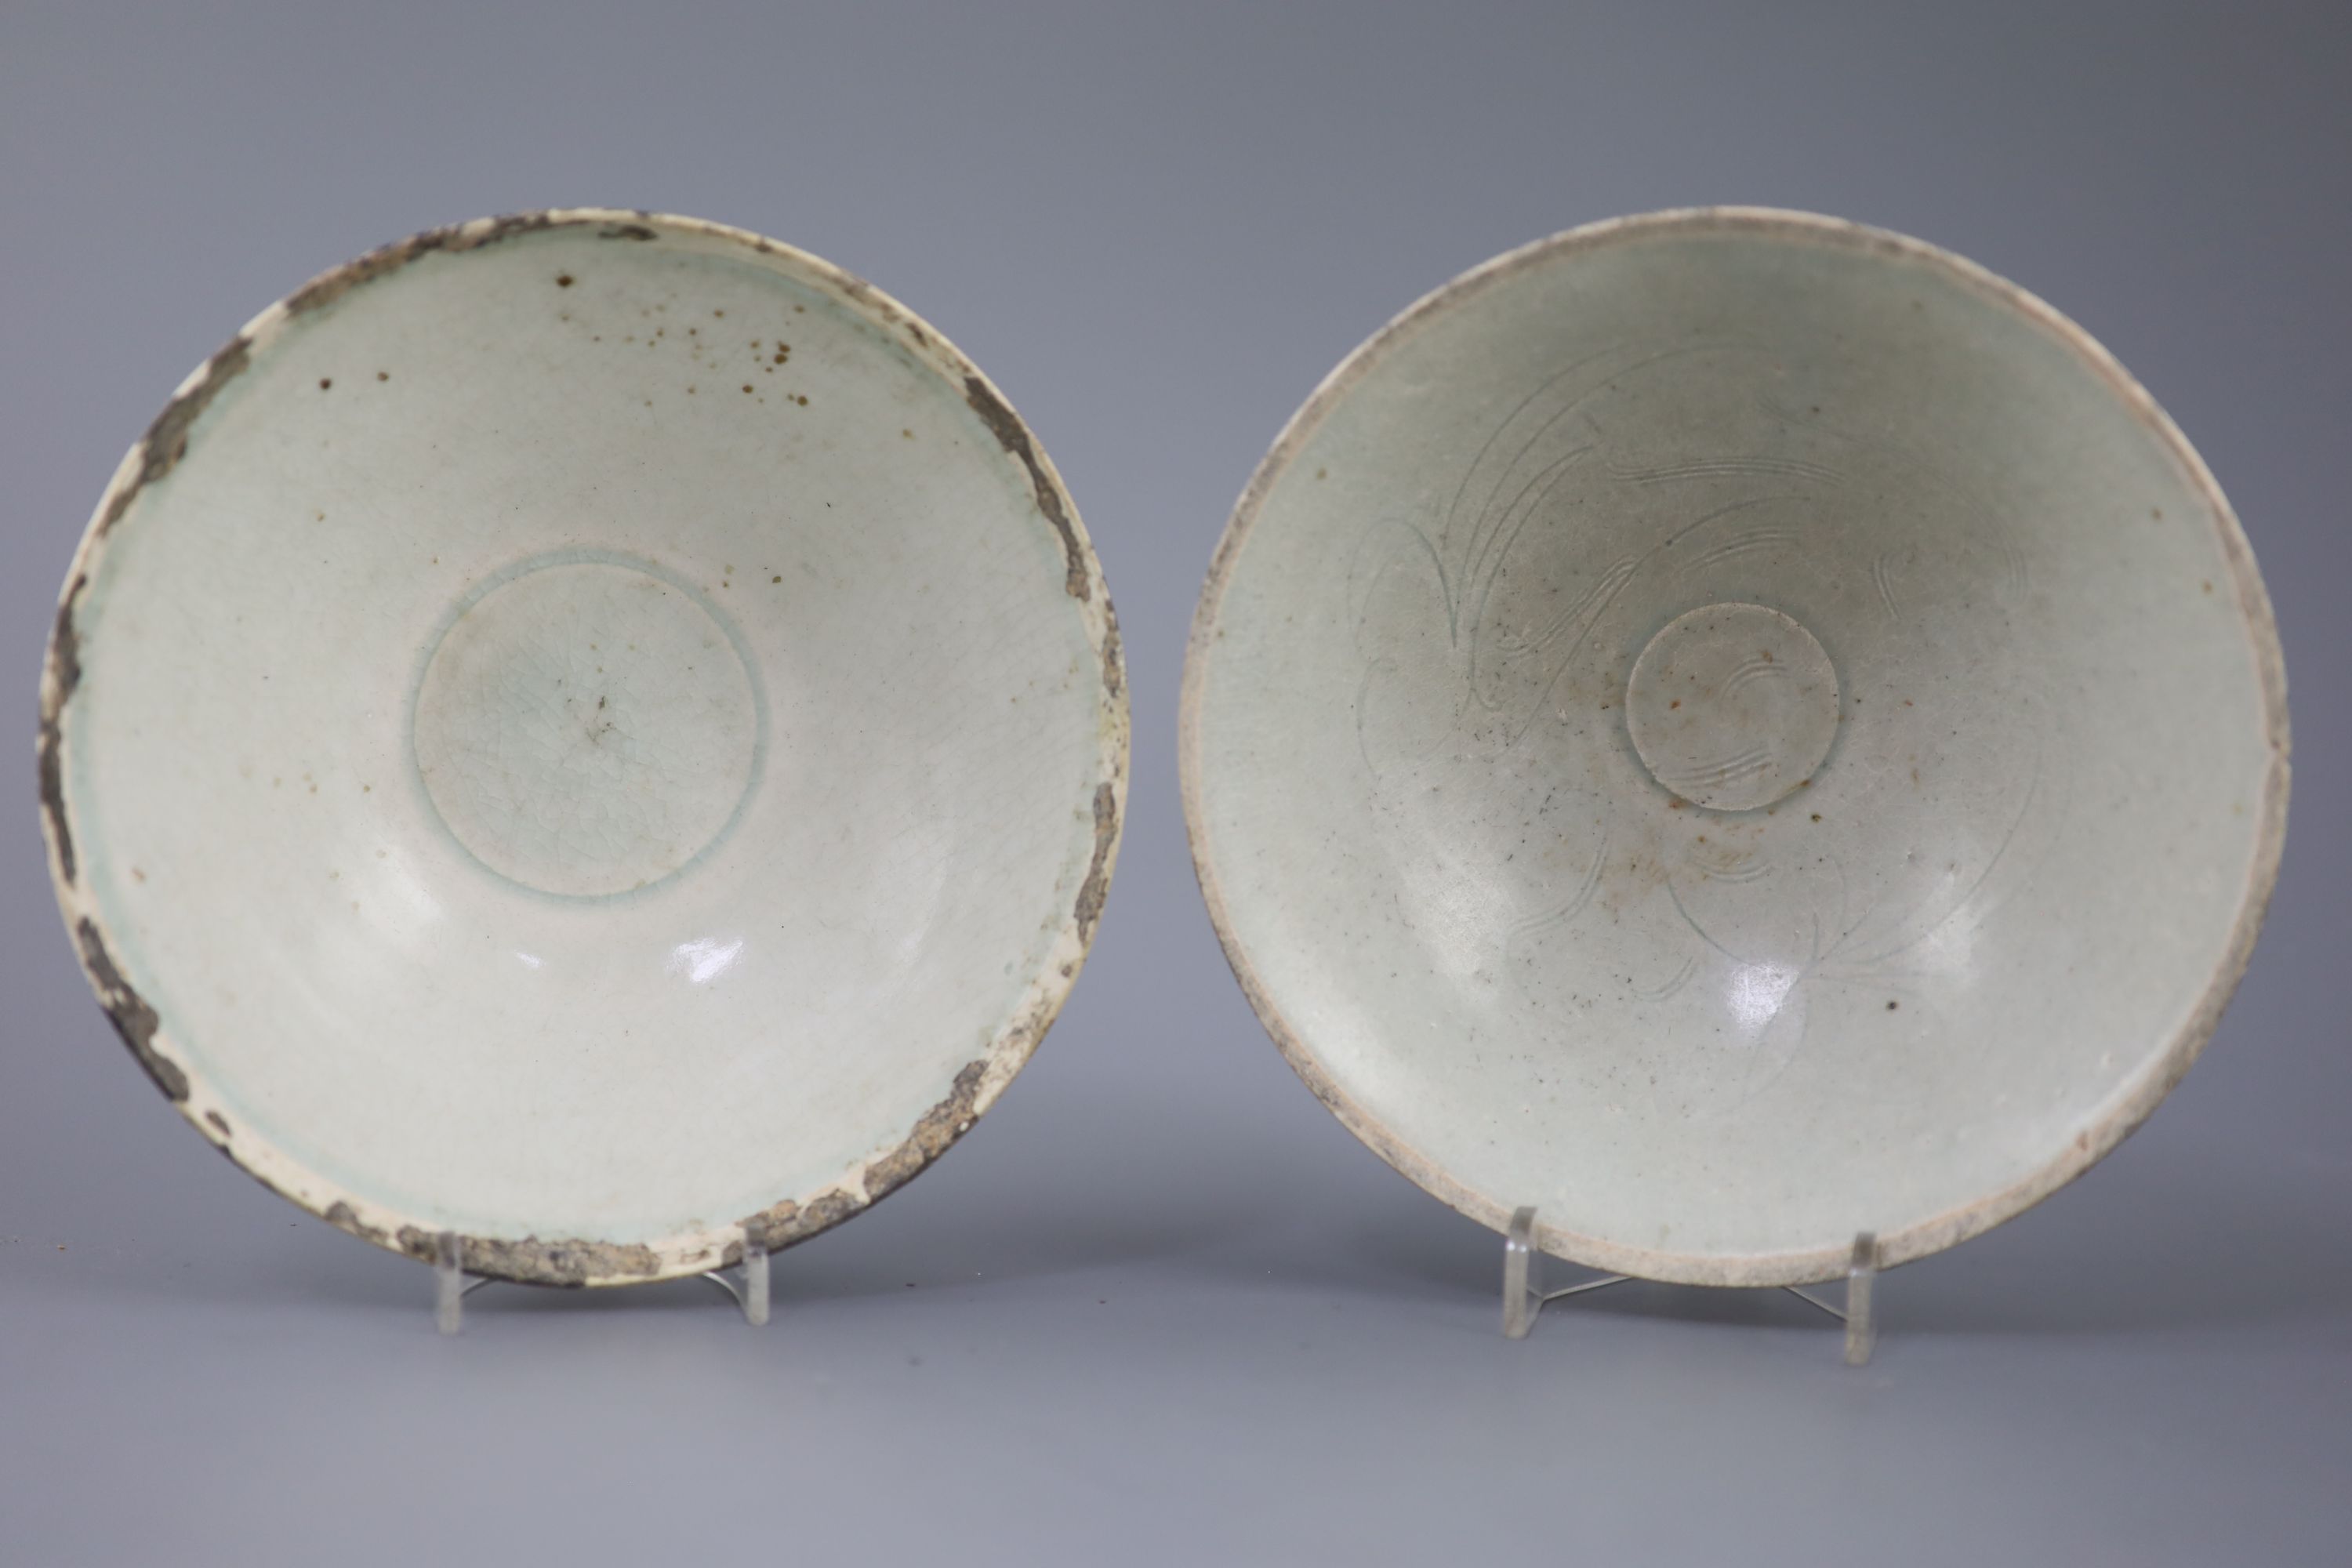 Two Chinese Qingbai bowls, Song dynasty, 17.7 and 17.8cm